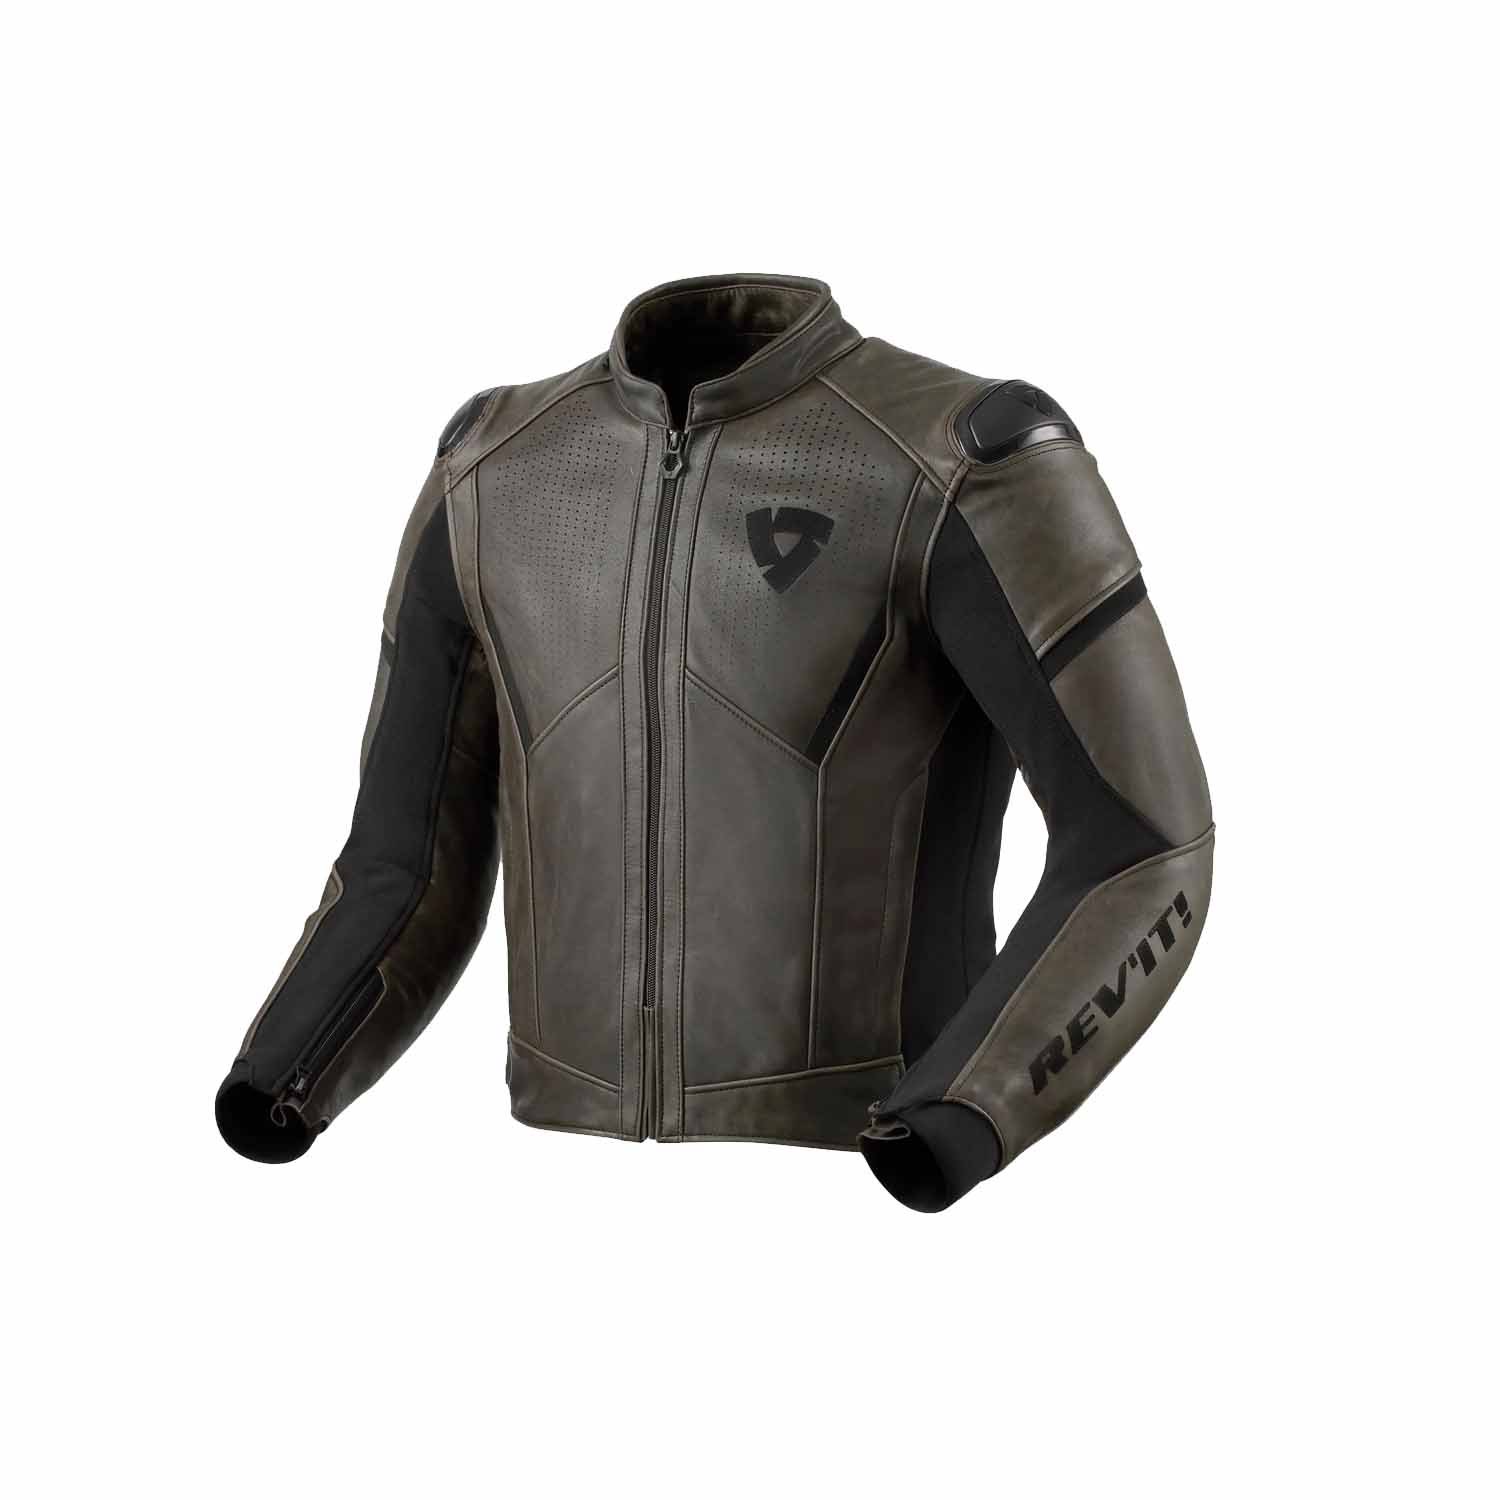 Image of EU REV'IT! Parallax Jacket Black Olive Taille 46